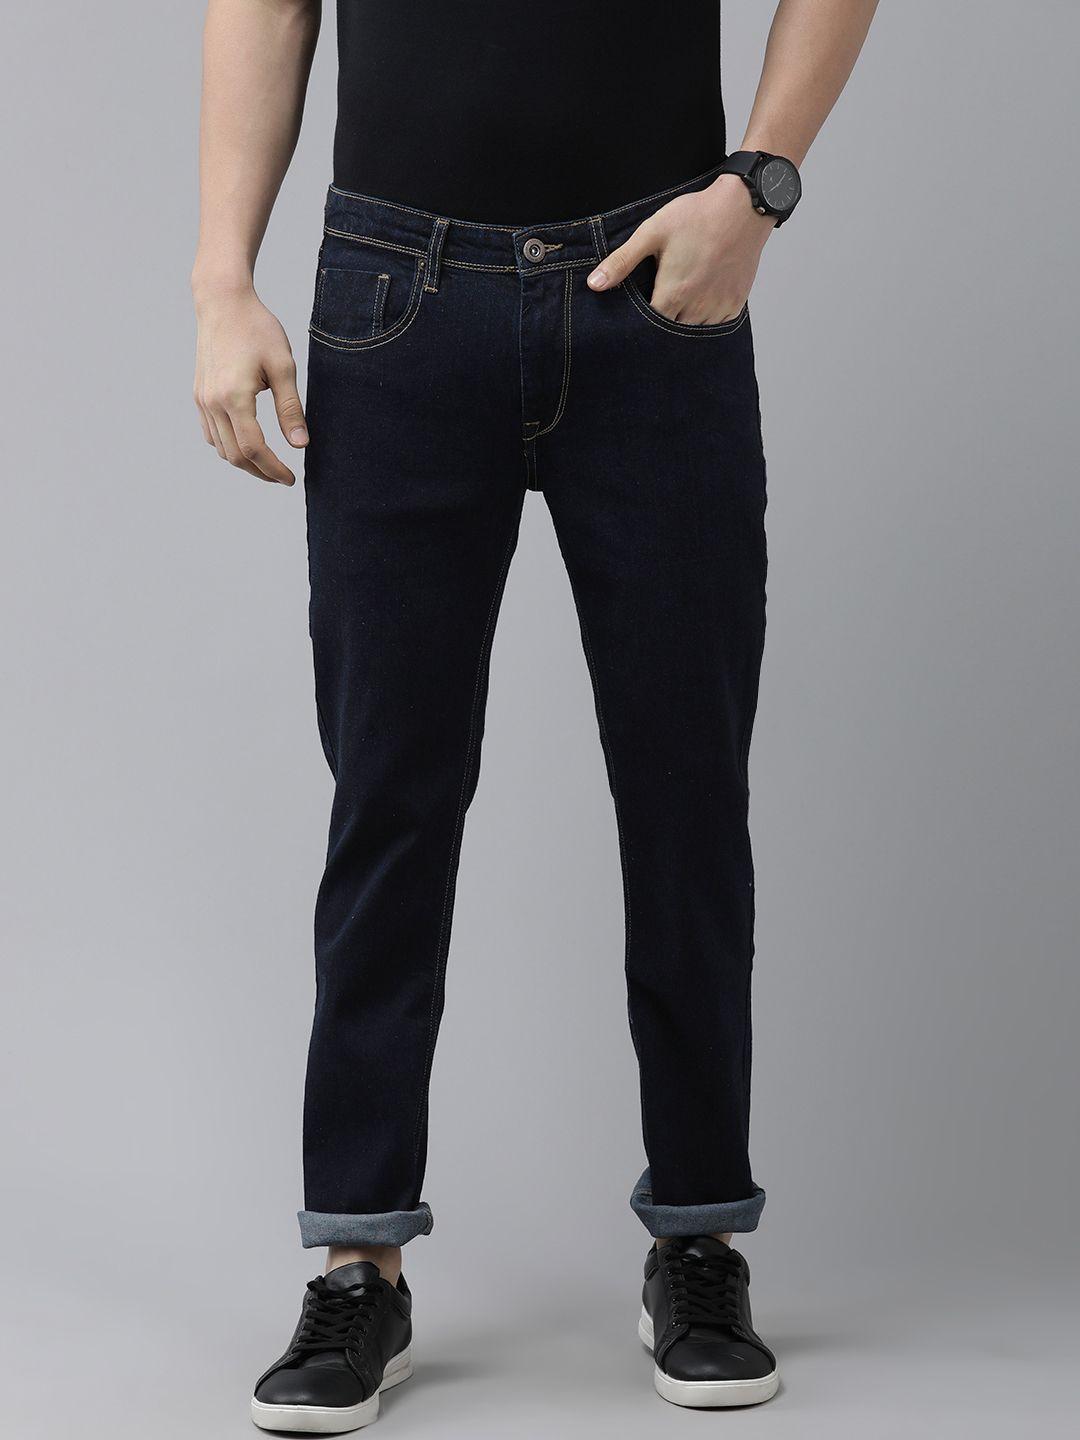 beat london by pepe jeans men blue tapered vapour slim fit low-rise stretchable jeans